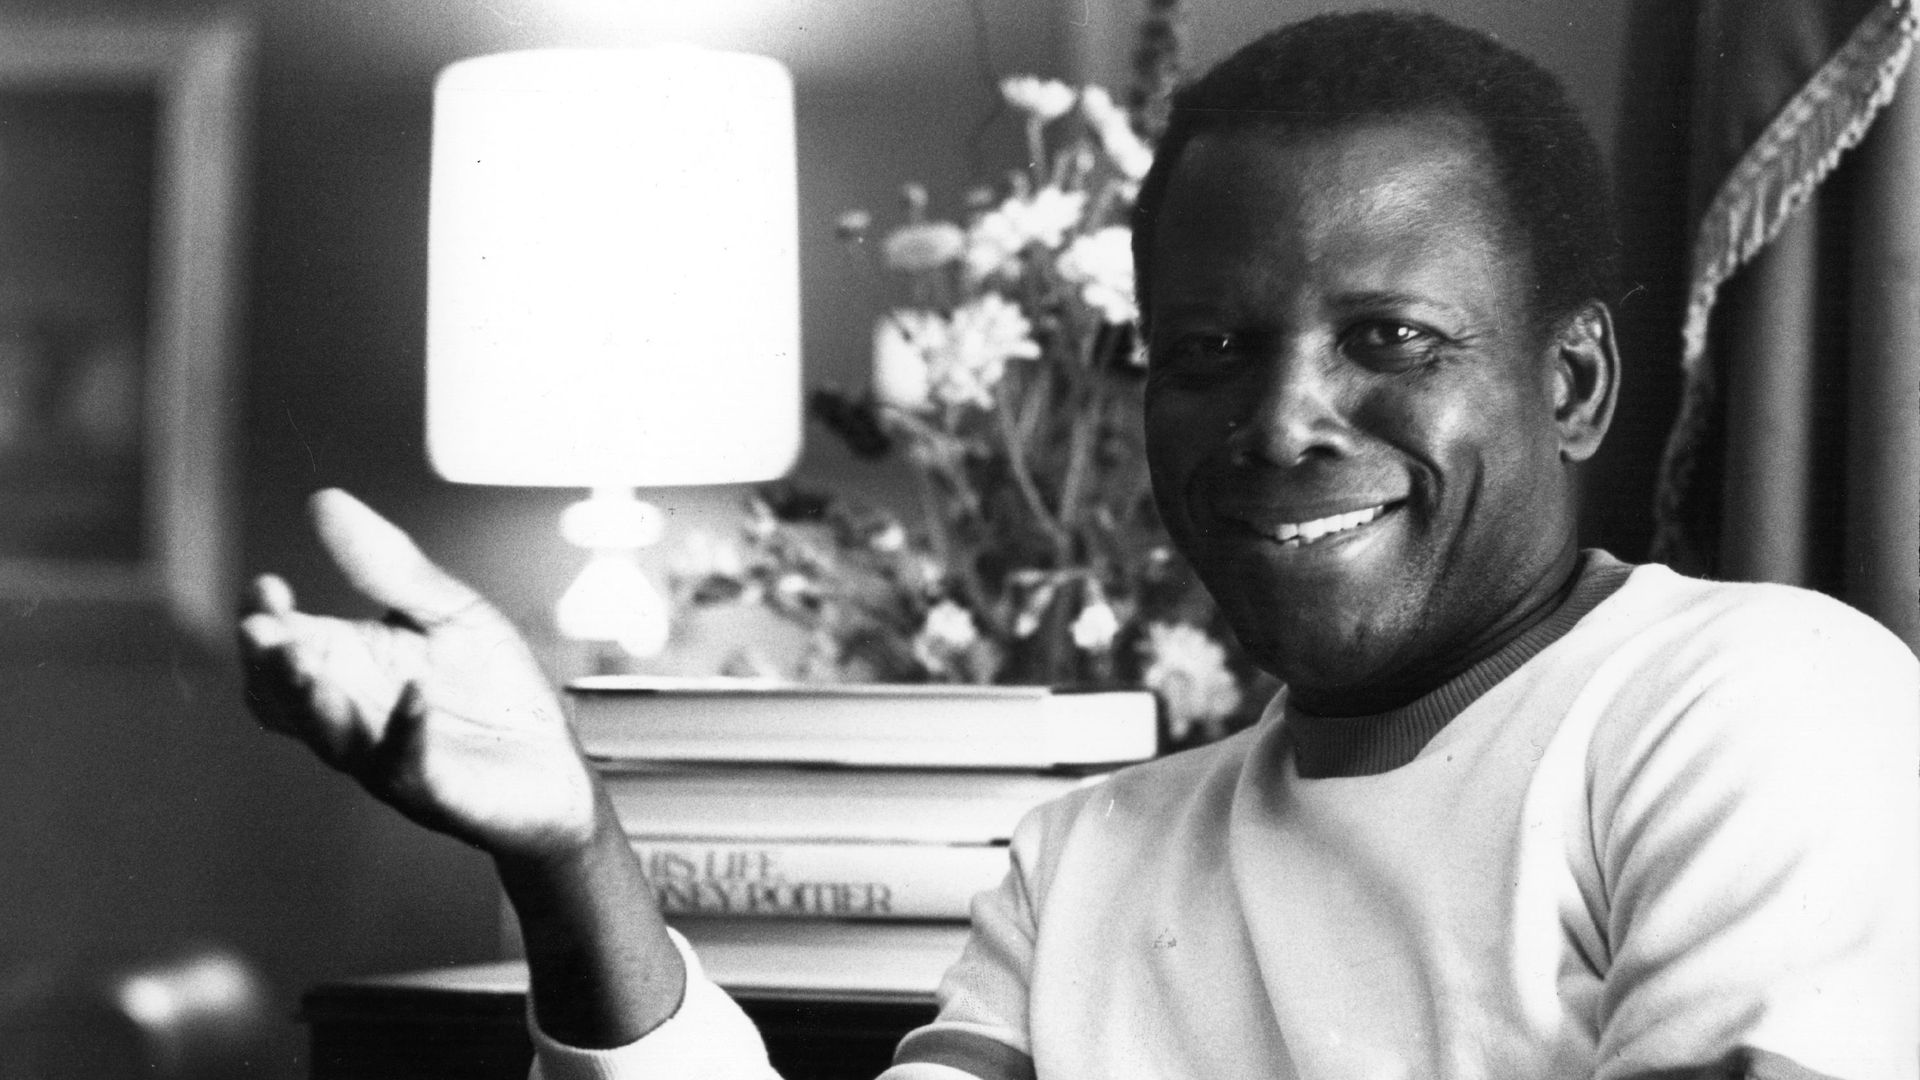 Sidney Poitier, wearing a white sweater, smiles while sitting alongside a bright lamp and extending his right hand.